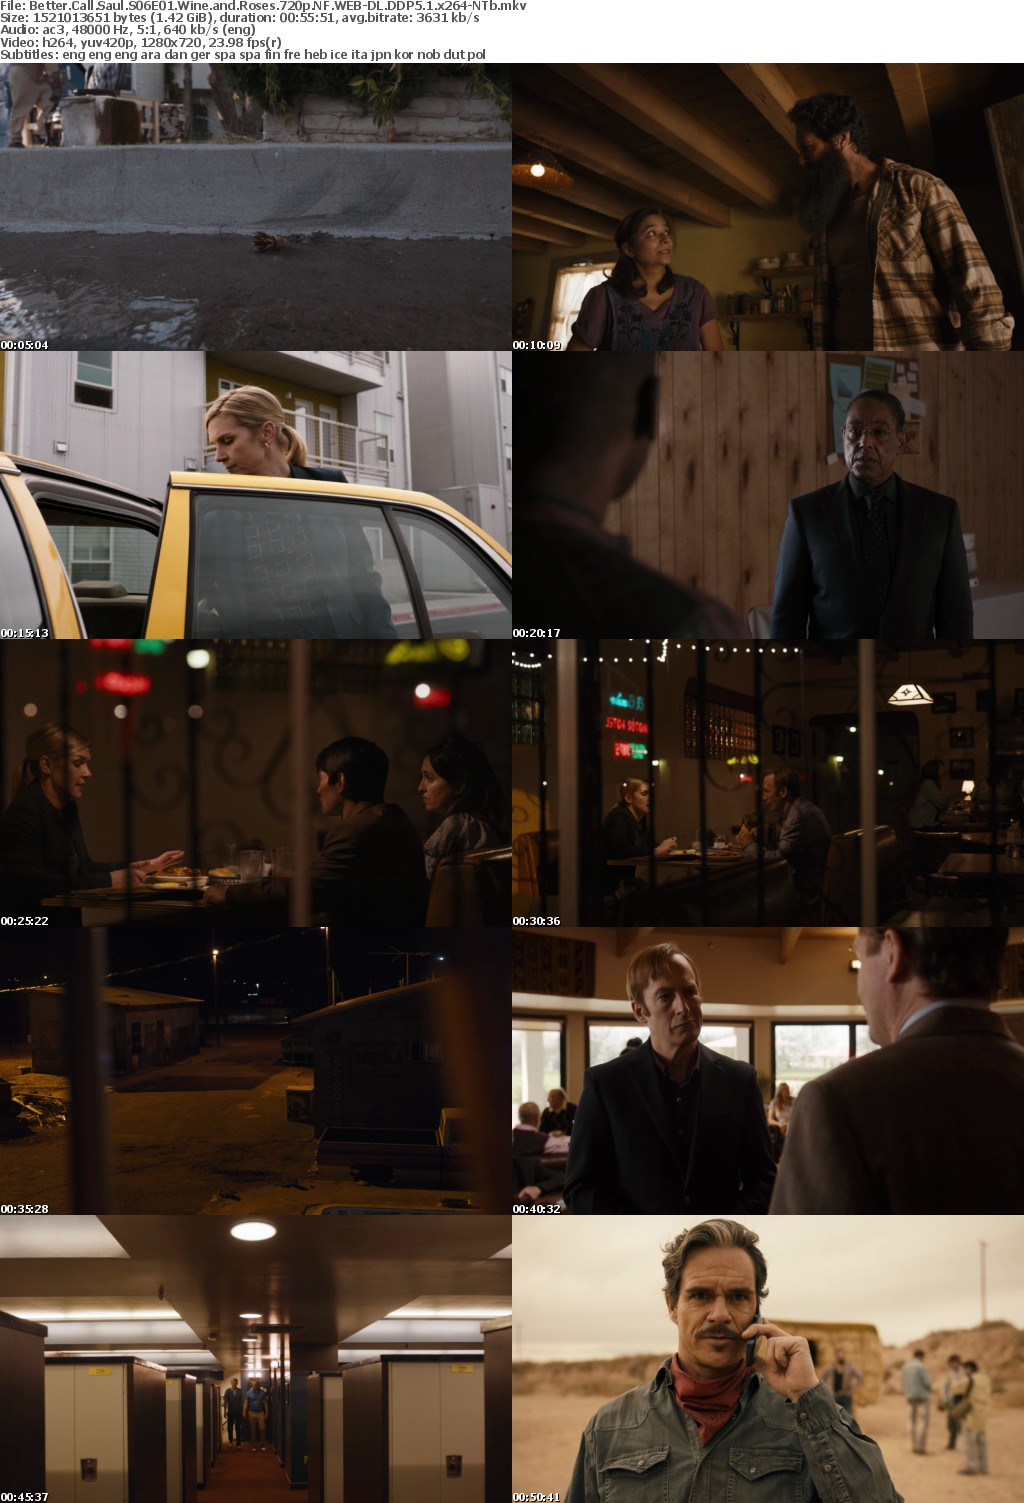 Better Call Saul S06E01 Wine and Roses 720p NF WEBRip DDP5 1 x264-NTb